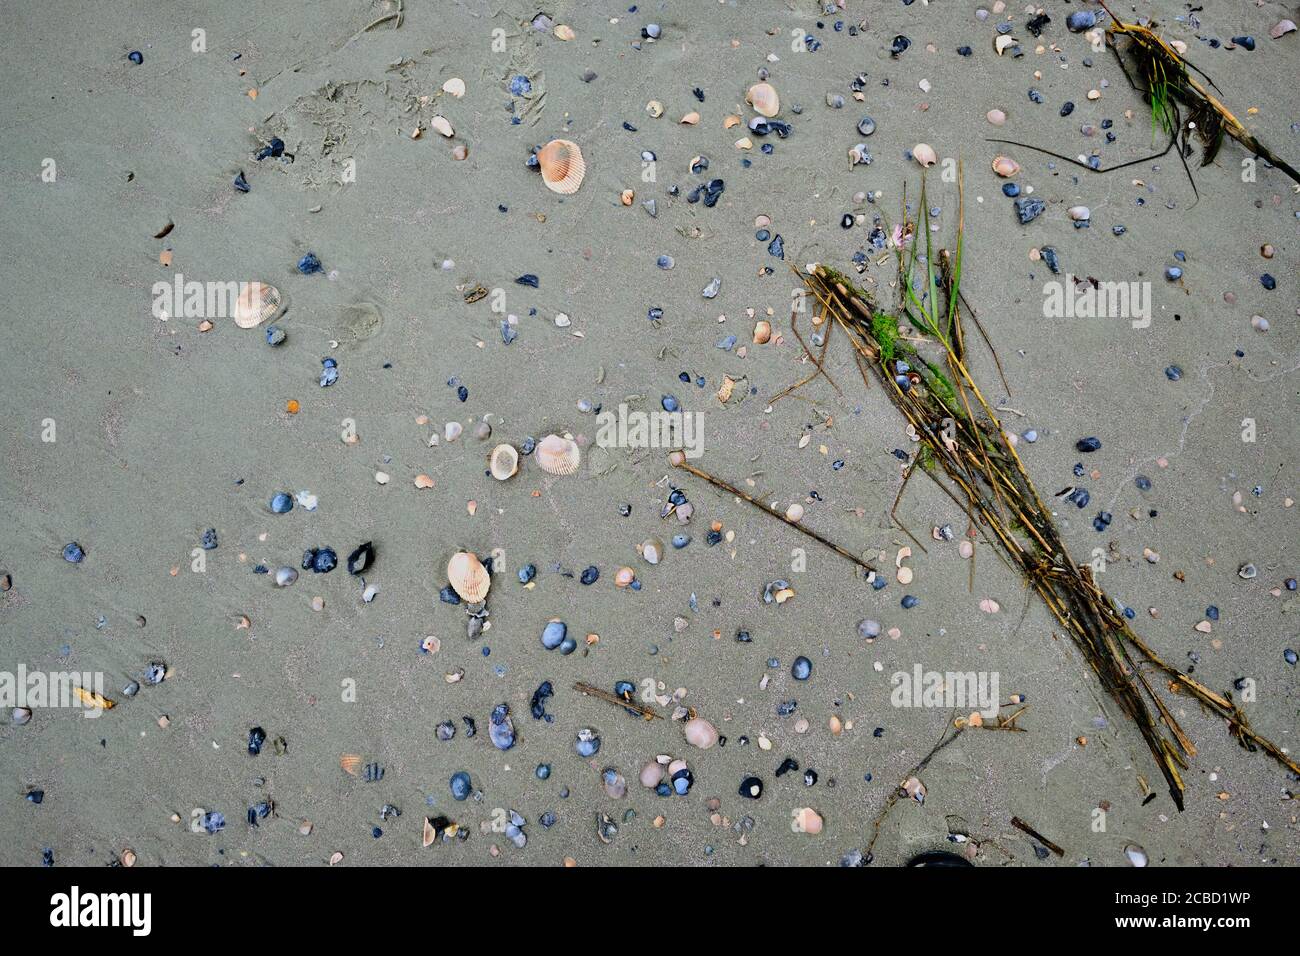 Shells of various sizes and animals are revealed on South Carolina beach after the tide goes out. Stock Photo